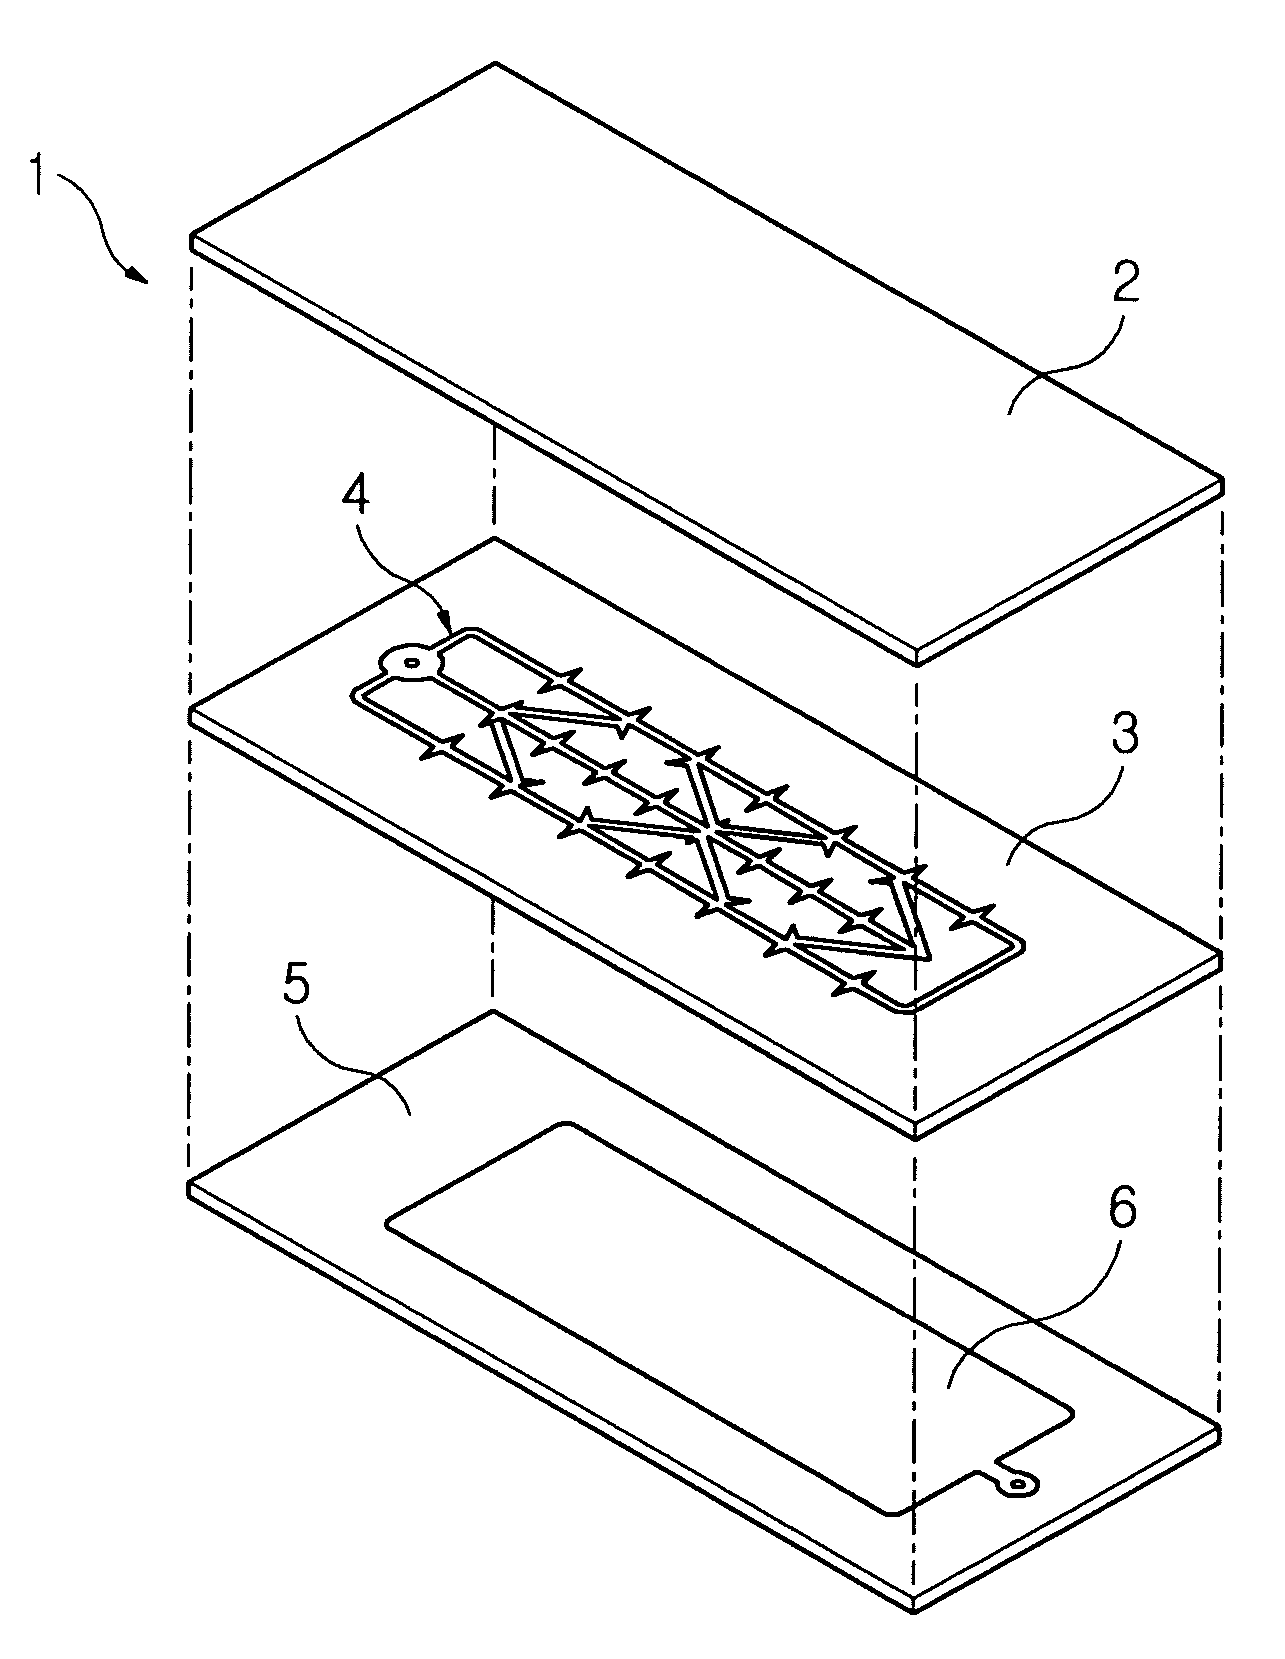 Ceramic electrode structure for generating ions, and ion generating apparatus using the same